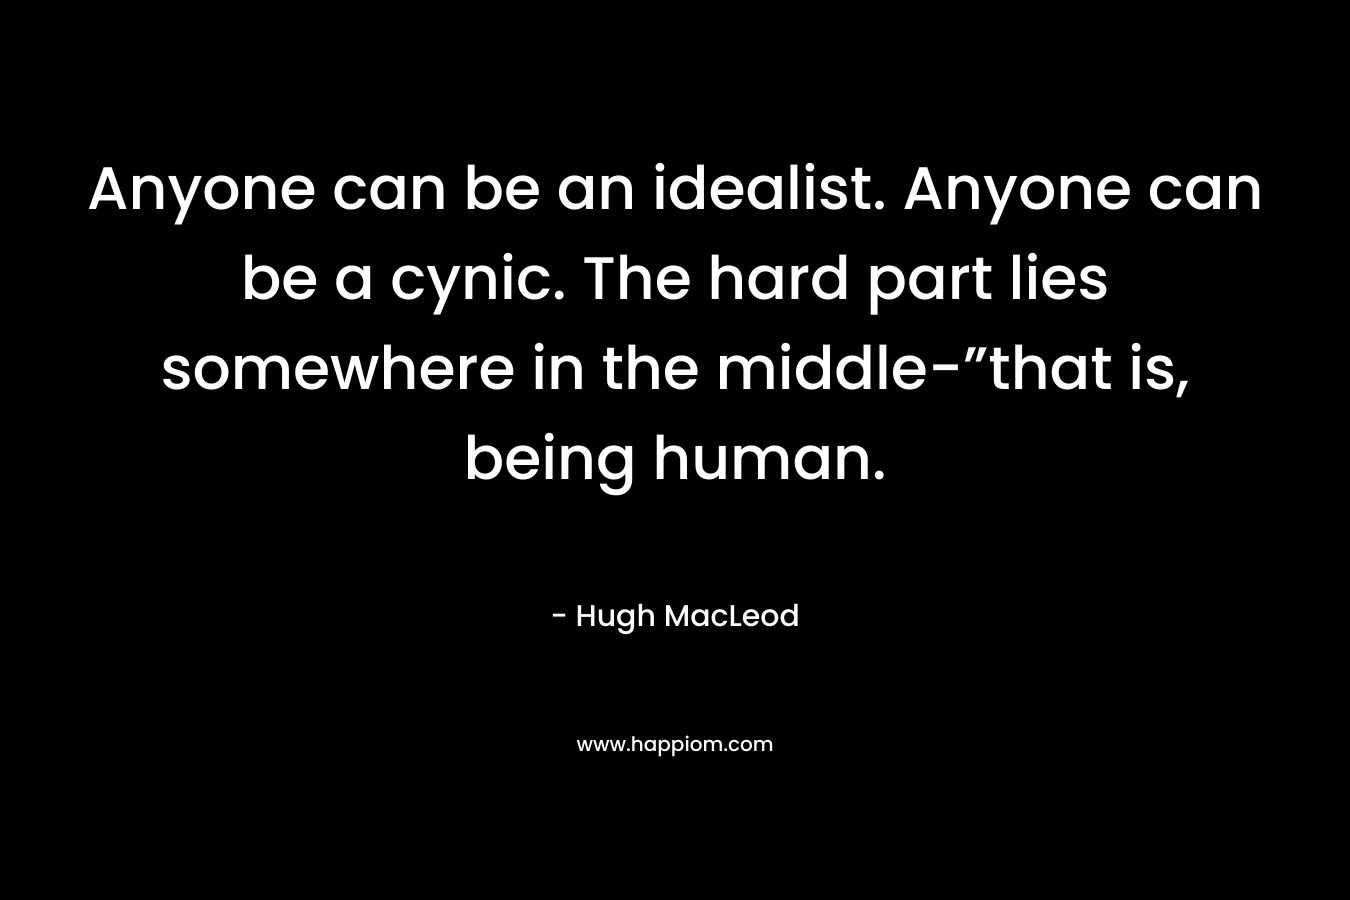 Anyone can be an idealist. Anyone can be a cynic. The hard part lies somewhere in the middle-”that is, being human.